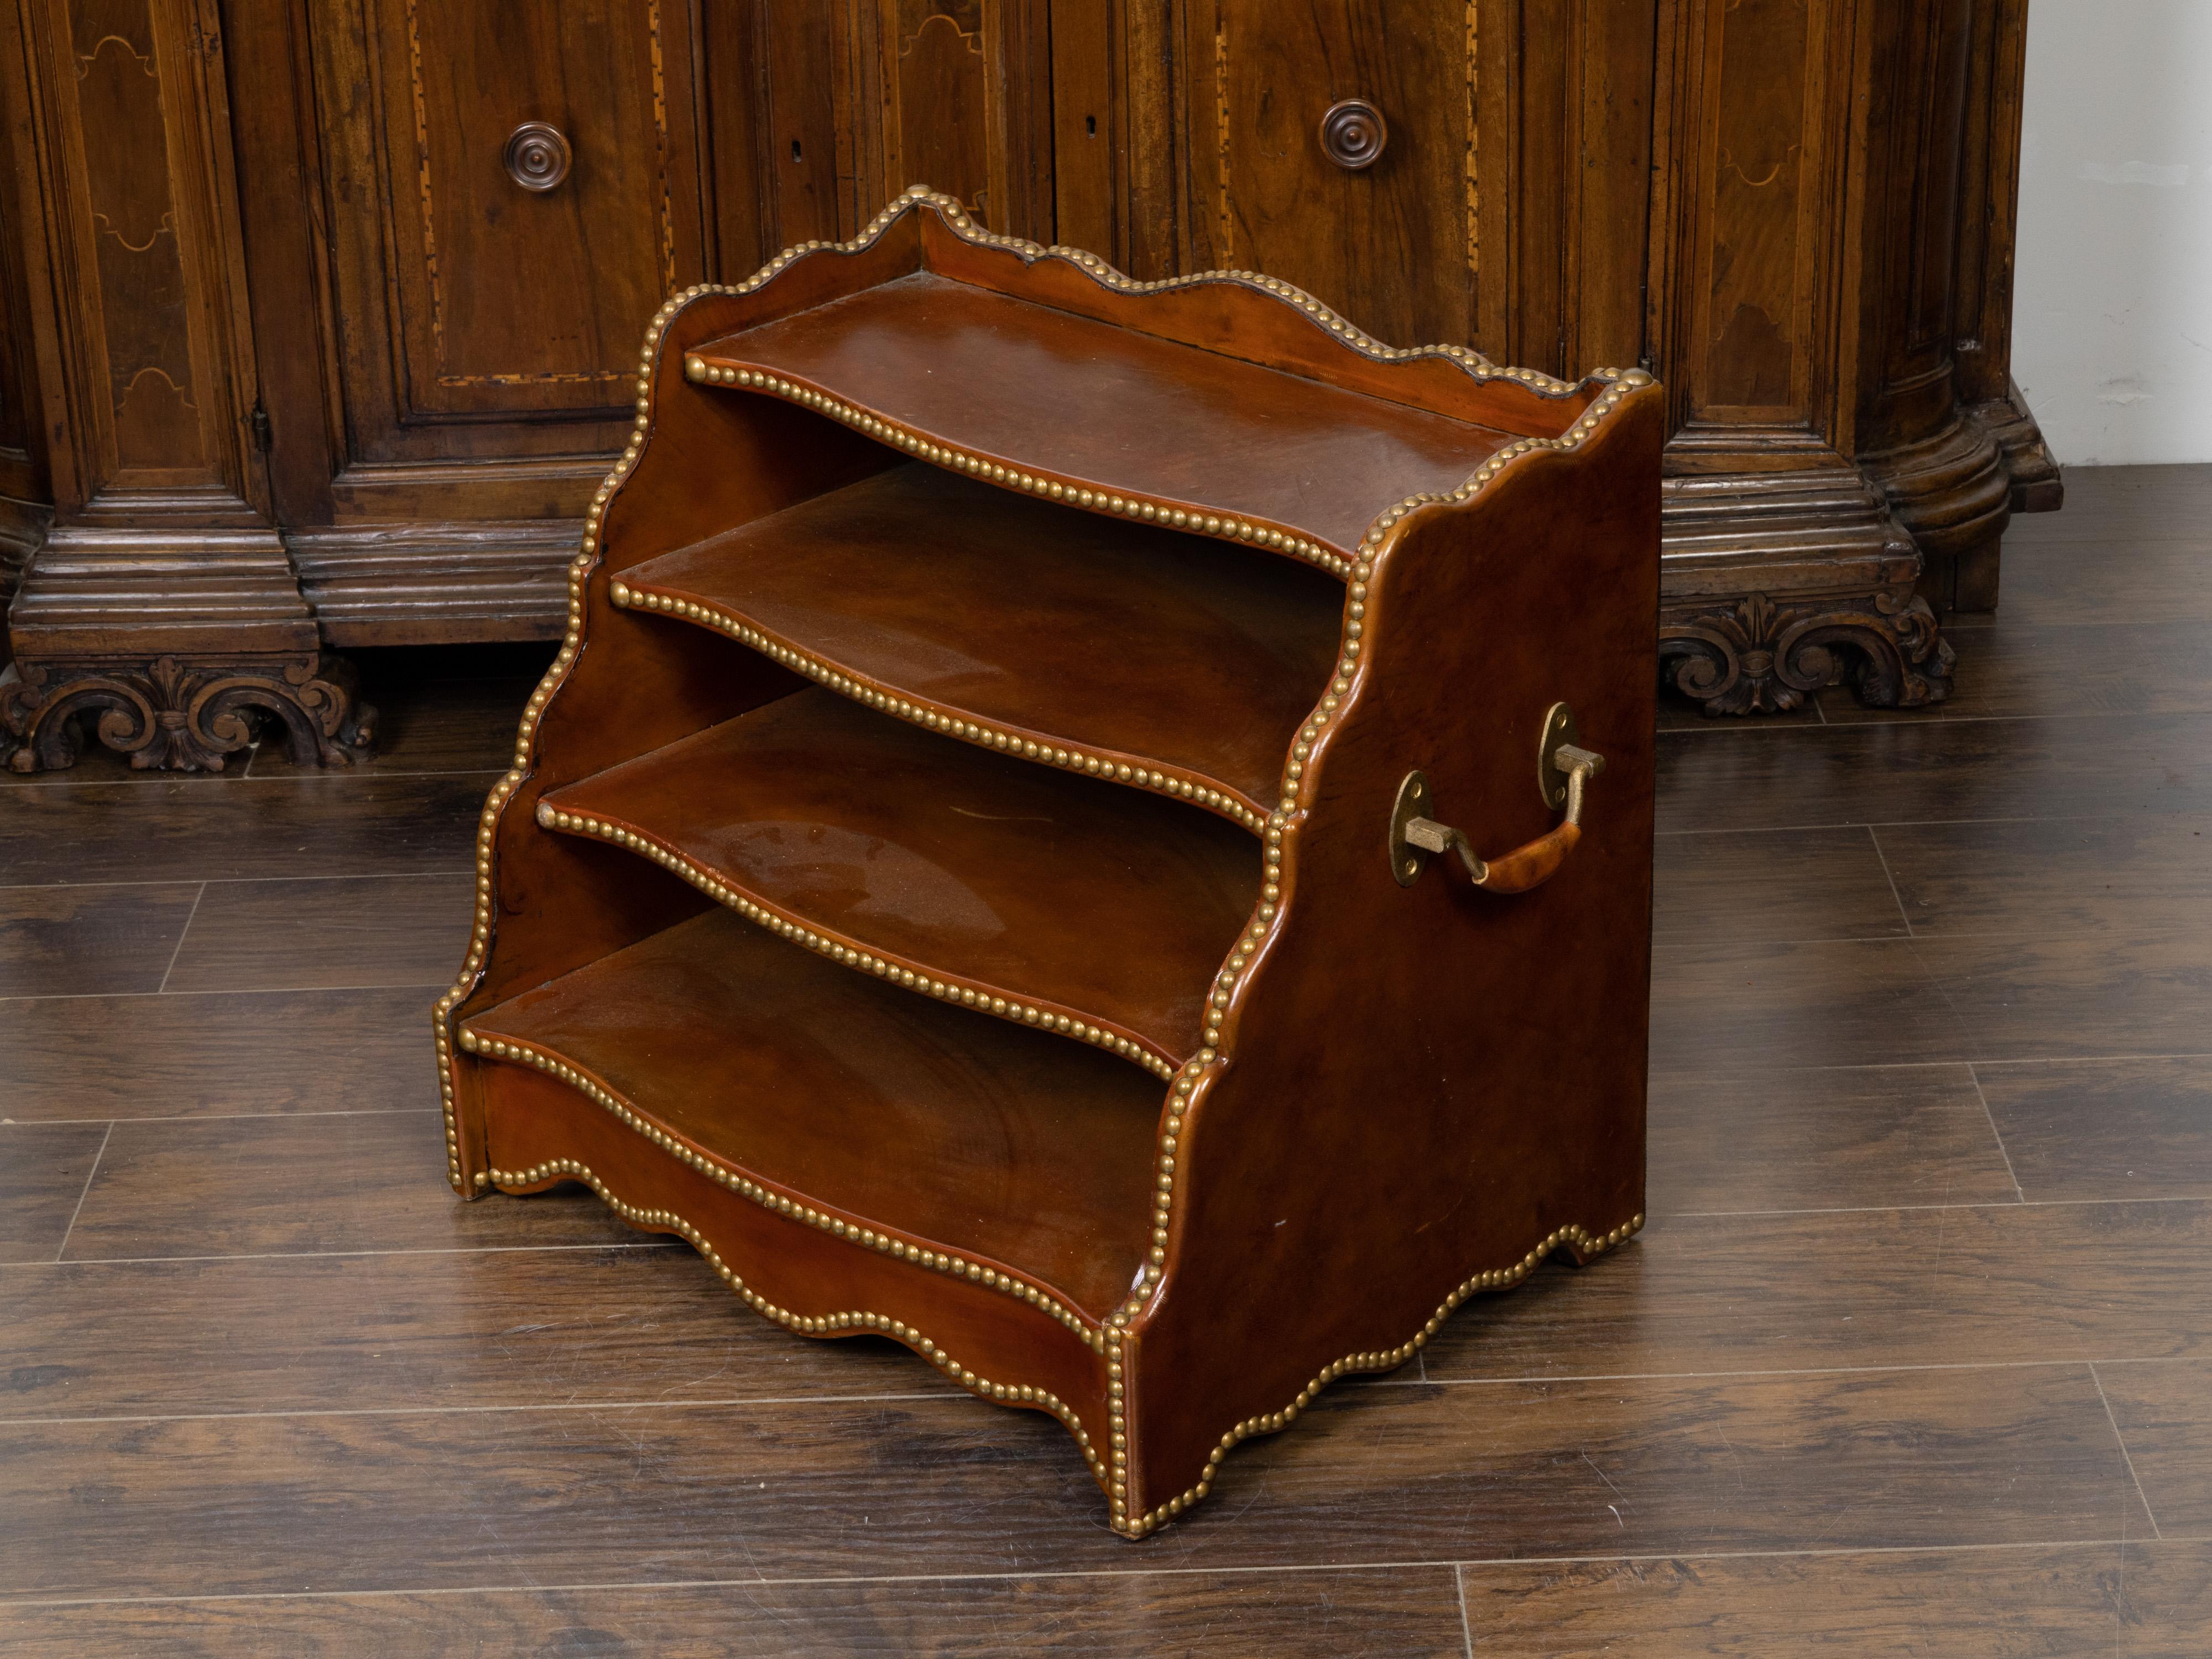 An English leather magazine rack from the mid 20h century, with four shelves and brass nailhead trim. Created in England during the midcentury period, this leather magazine rack features a scalloped silhouette flanked with waterfall style sides.